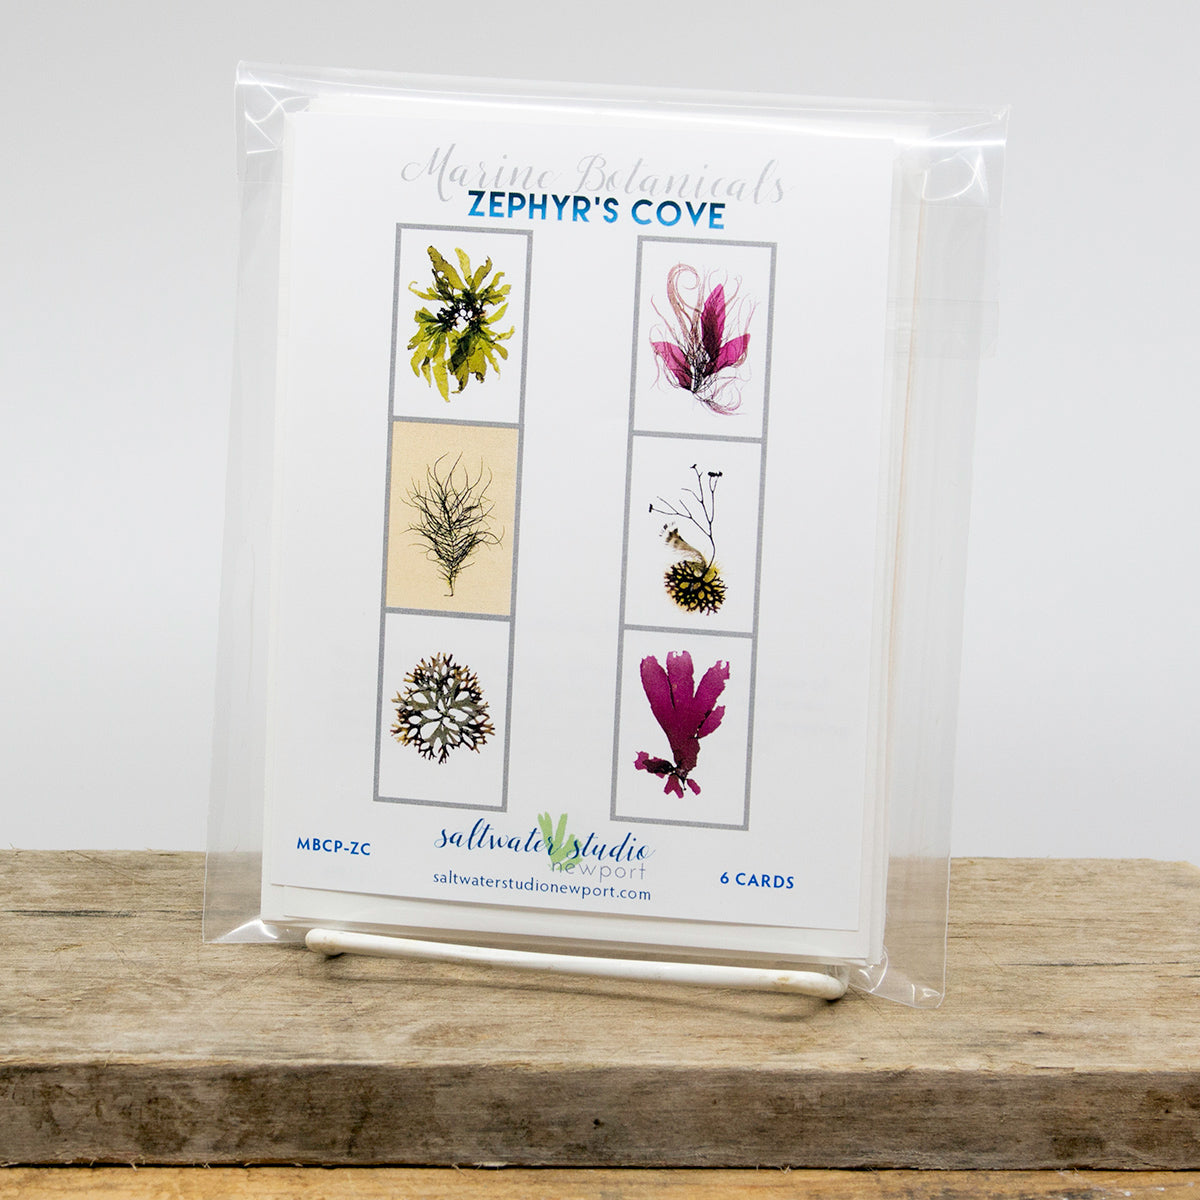 Zephyr's Cove Card Package